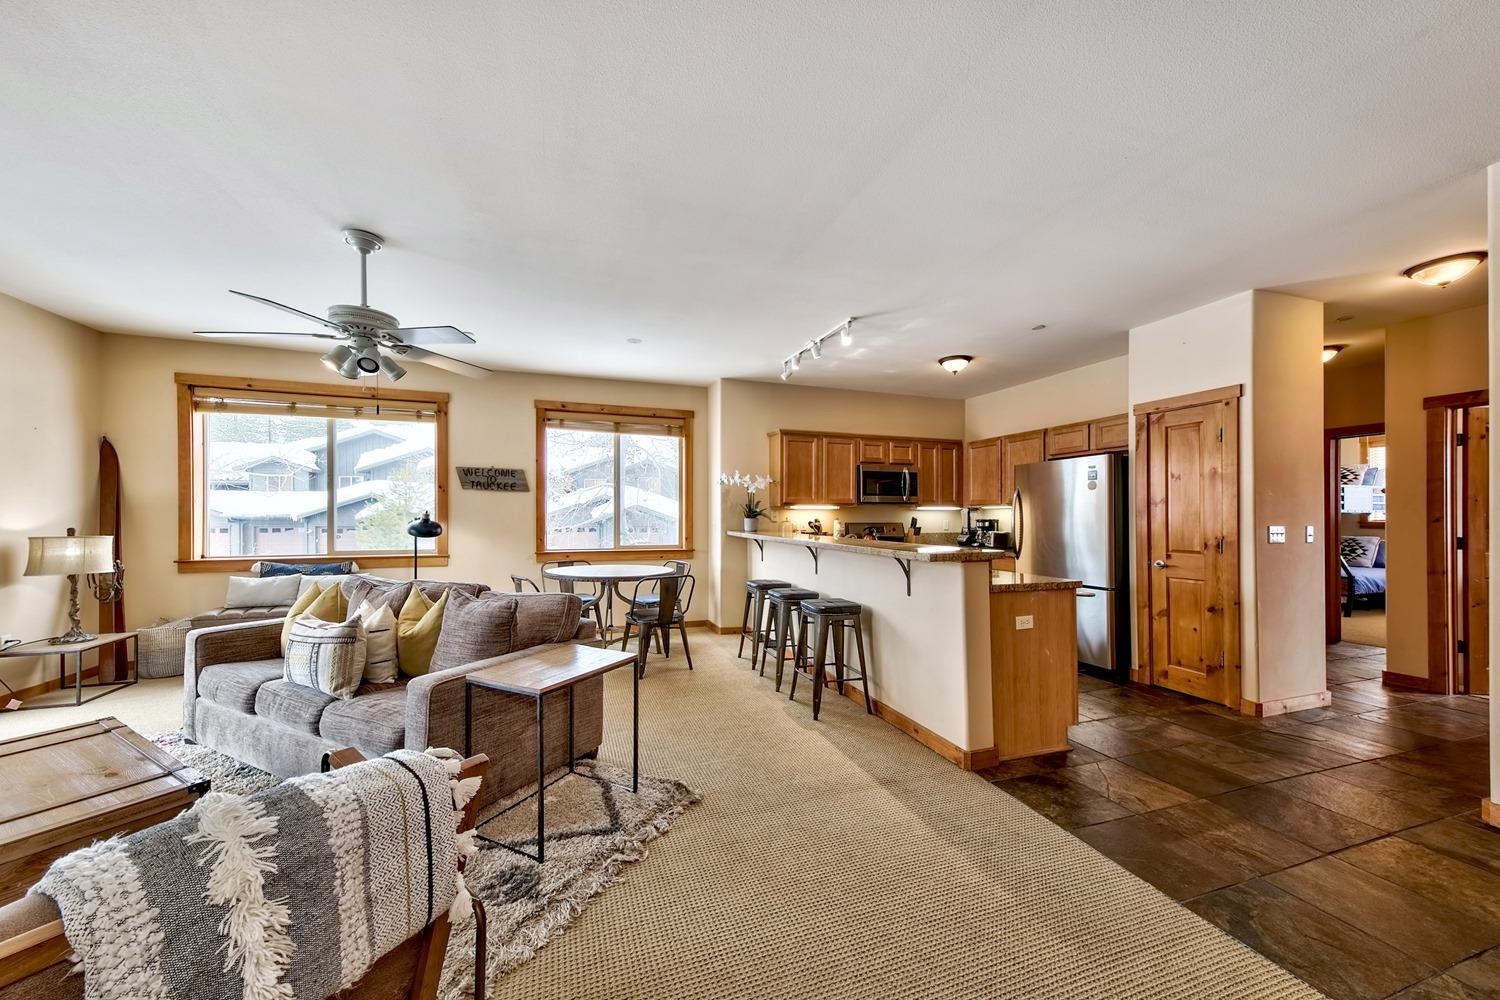 Image for 10601 Boulders Road, Truckee, CA 96161